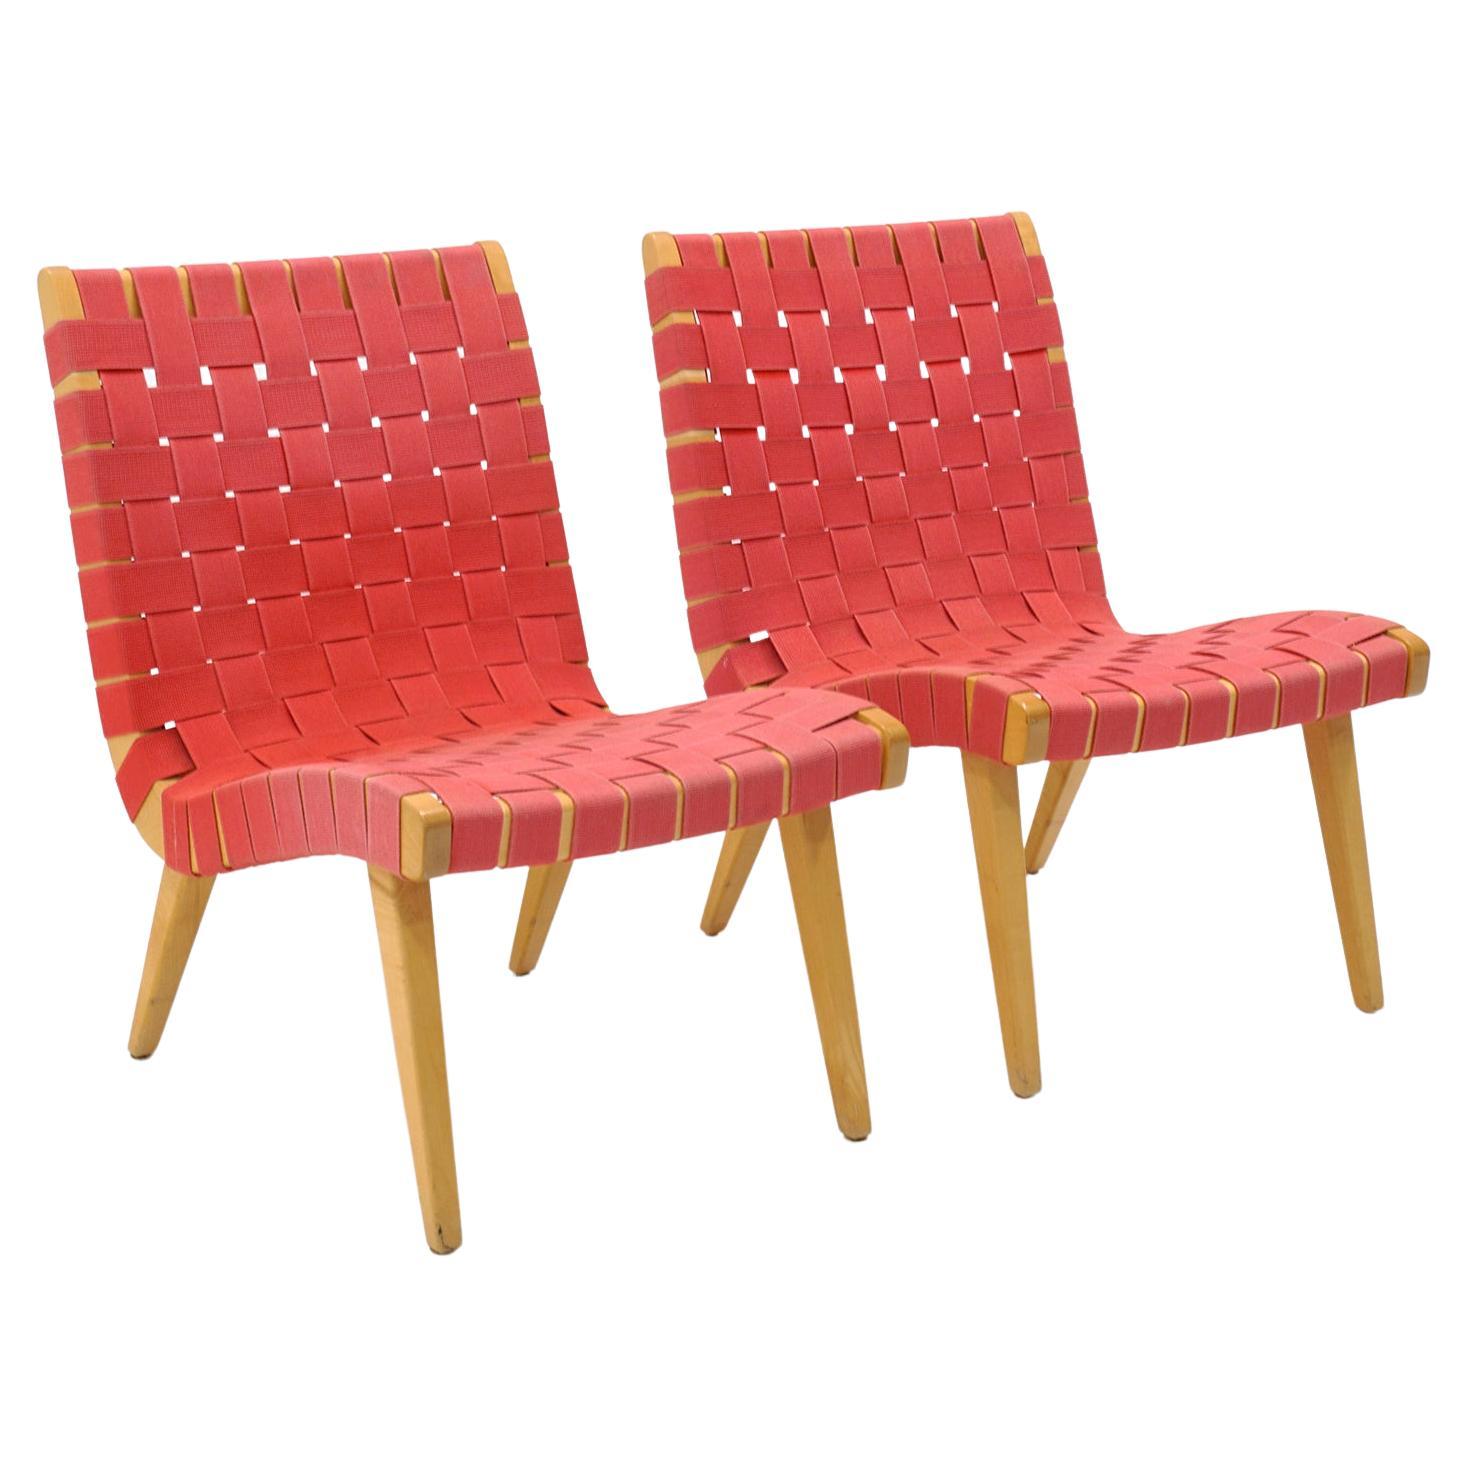 Pair Jens Risom Armless Lounge Chairs. Maple with Red Webbing. Signed. For Sale